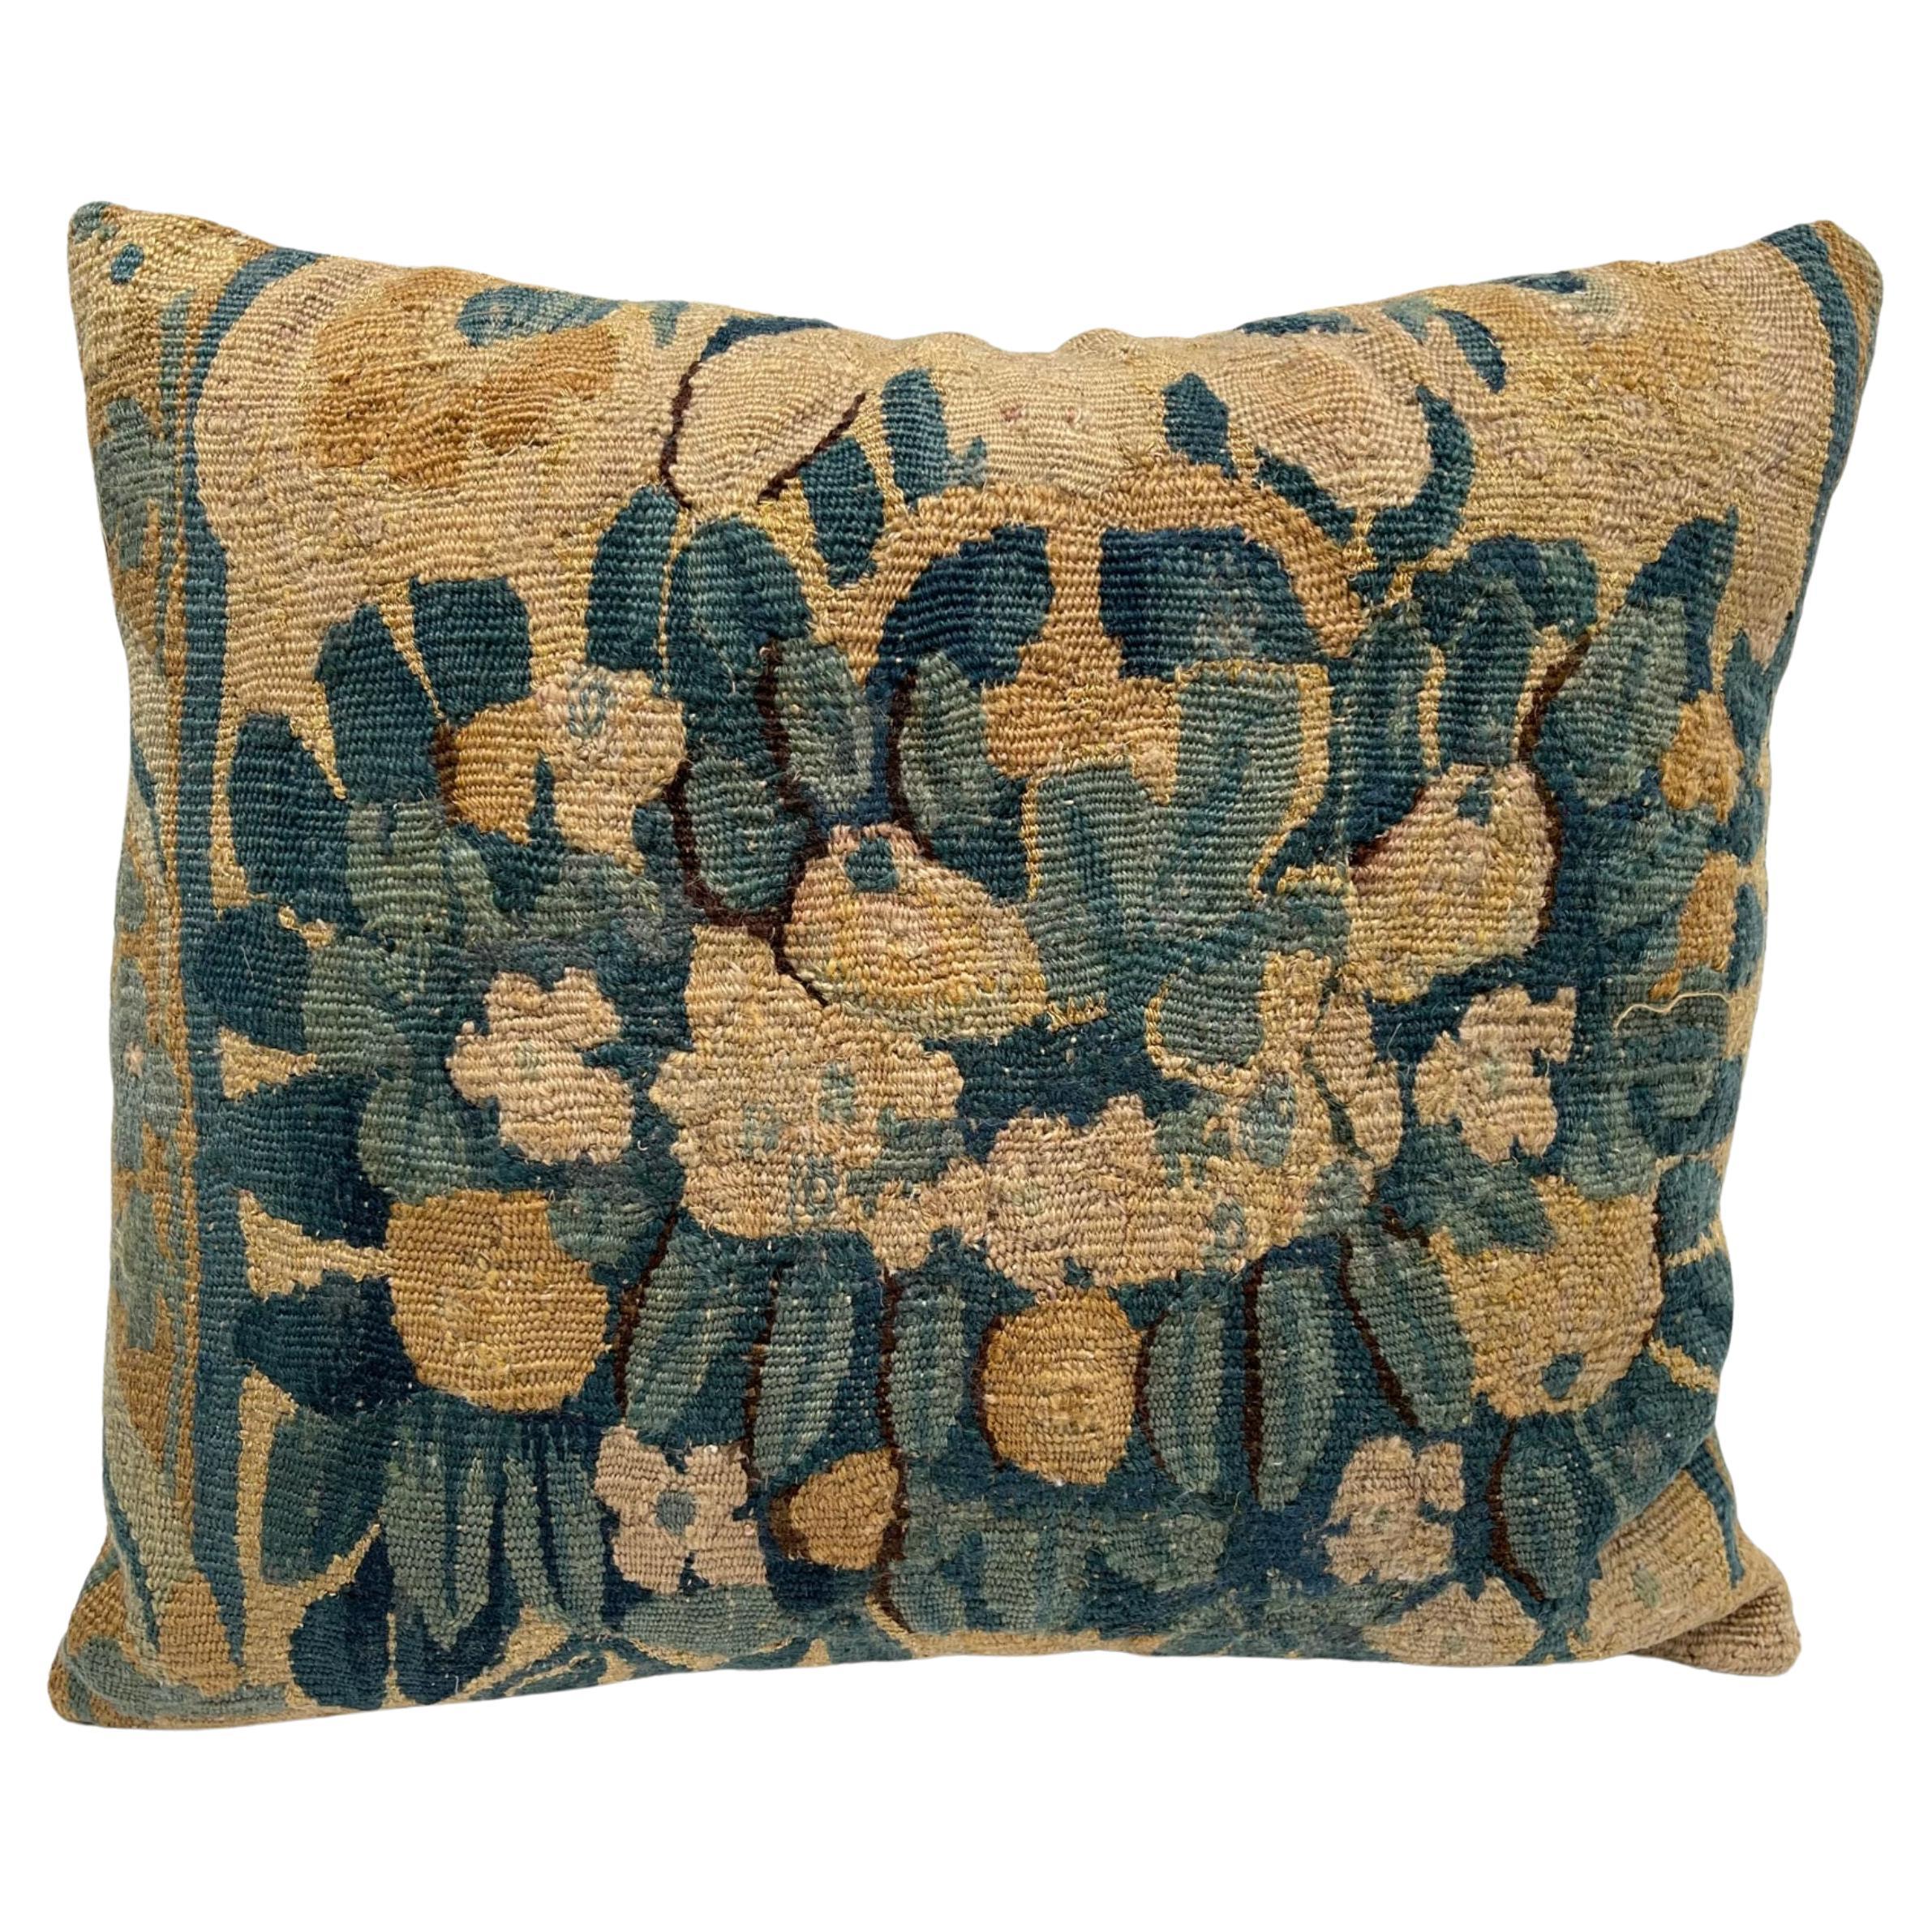 Mid-17th Century Flemish Tapestry Pillow For Sale